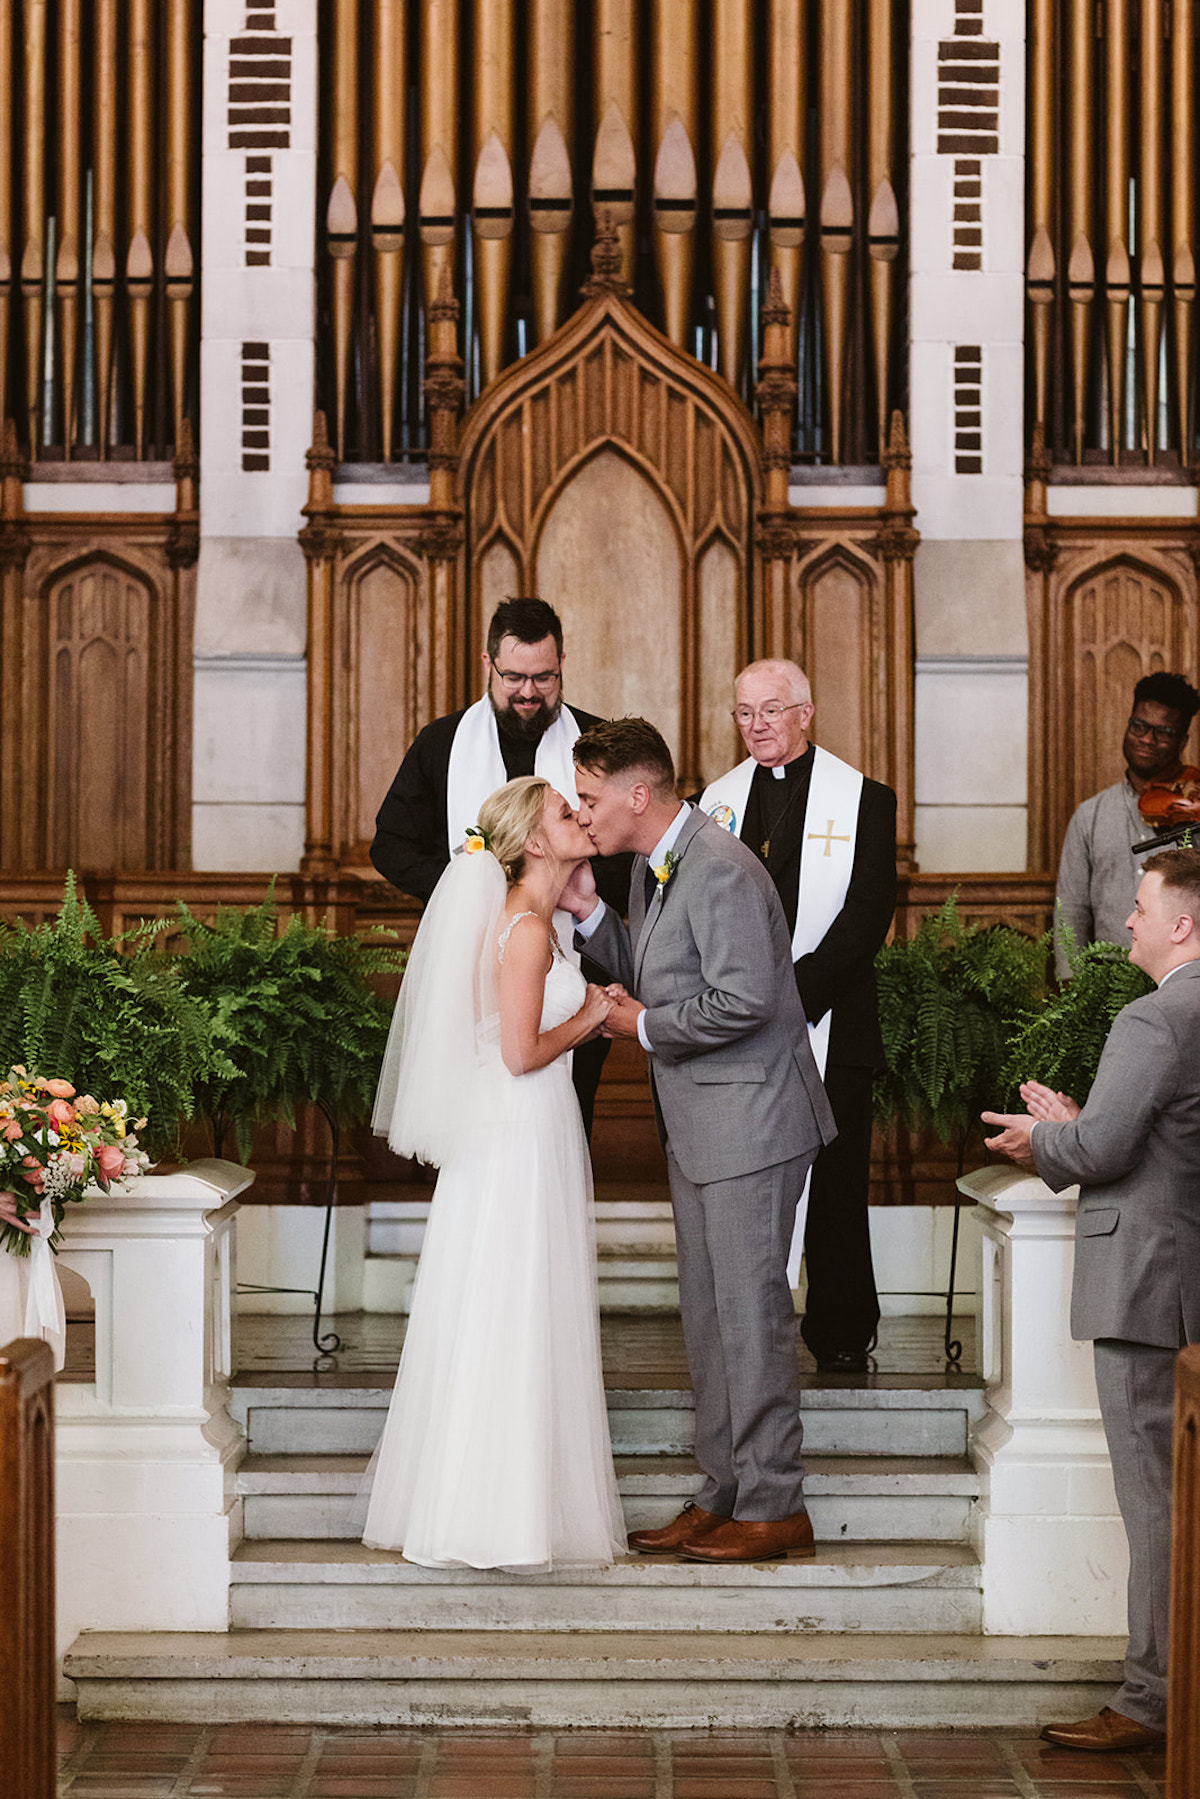 Bride and groom stand on stone steps at the altar, kissing. Two priests and church organ behind them.